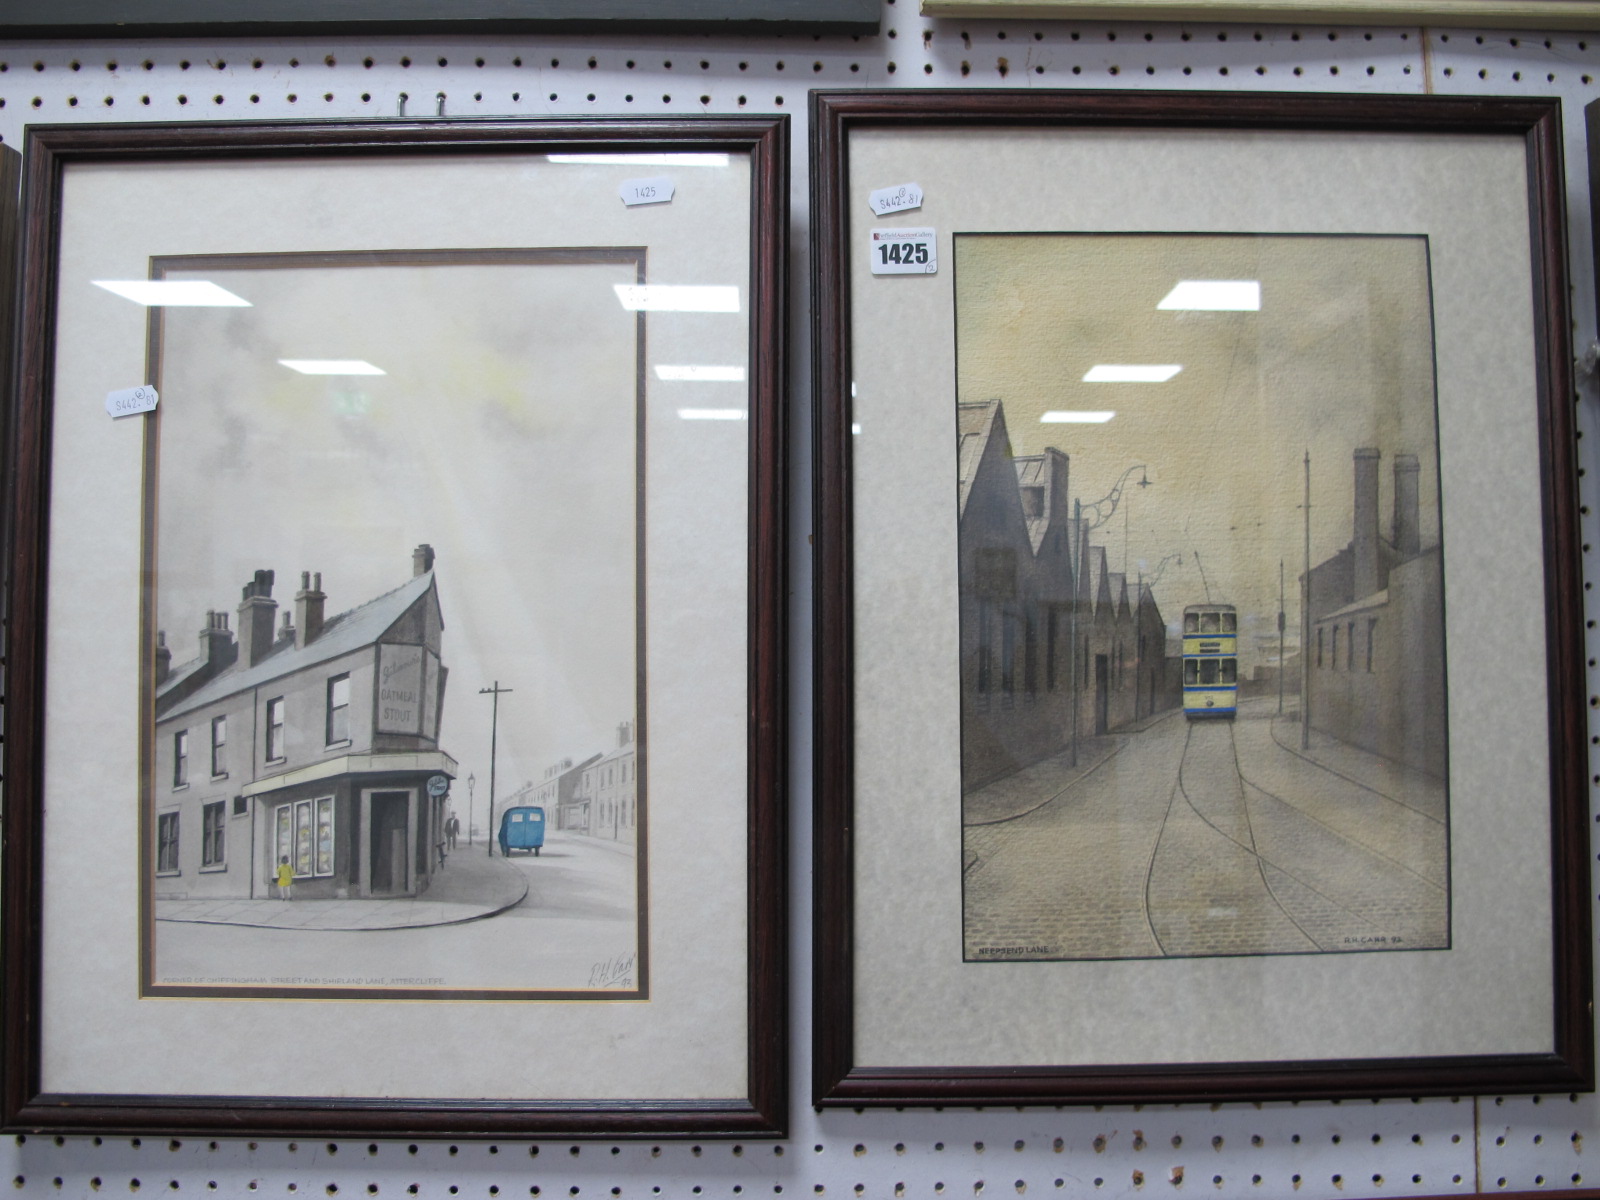 R.H.Carr 'Neepsend Lane' and 'Attercliffe', pair of watercolours, 33.5 x 22.5cm, signed and dated,